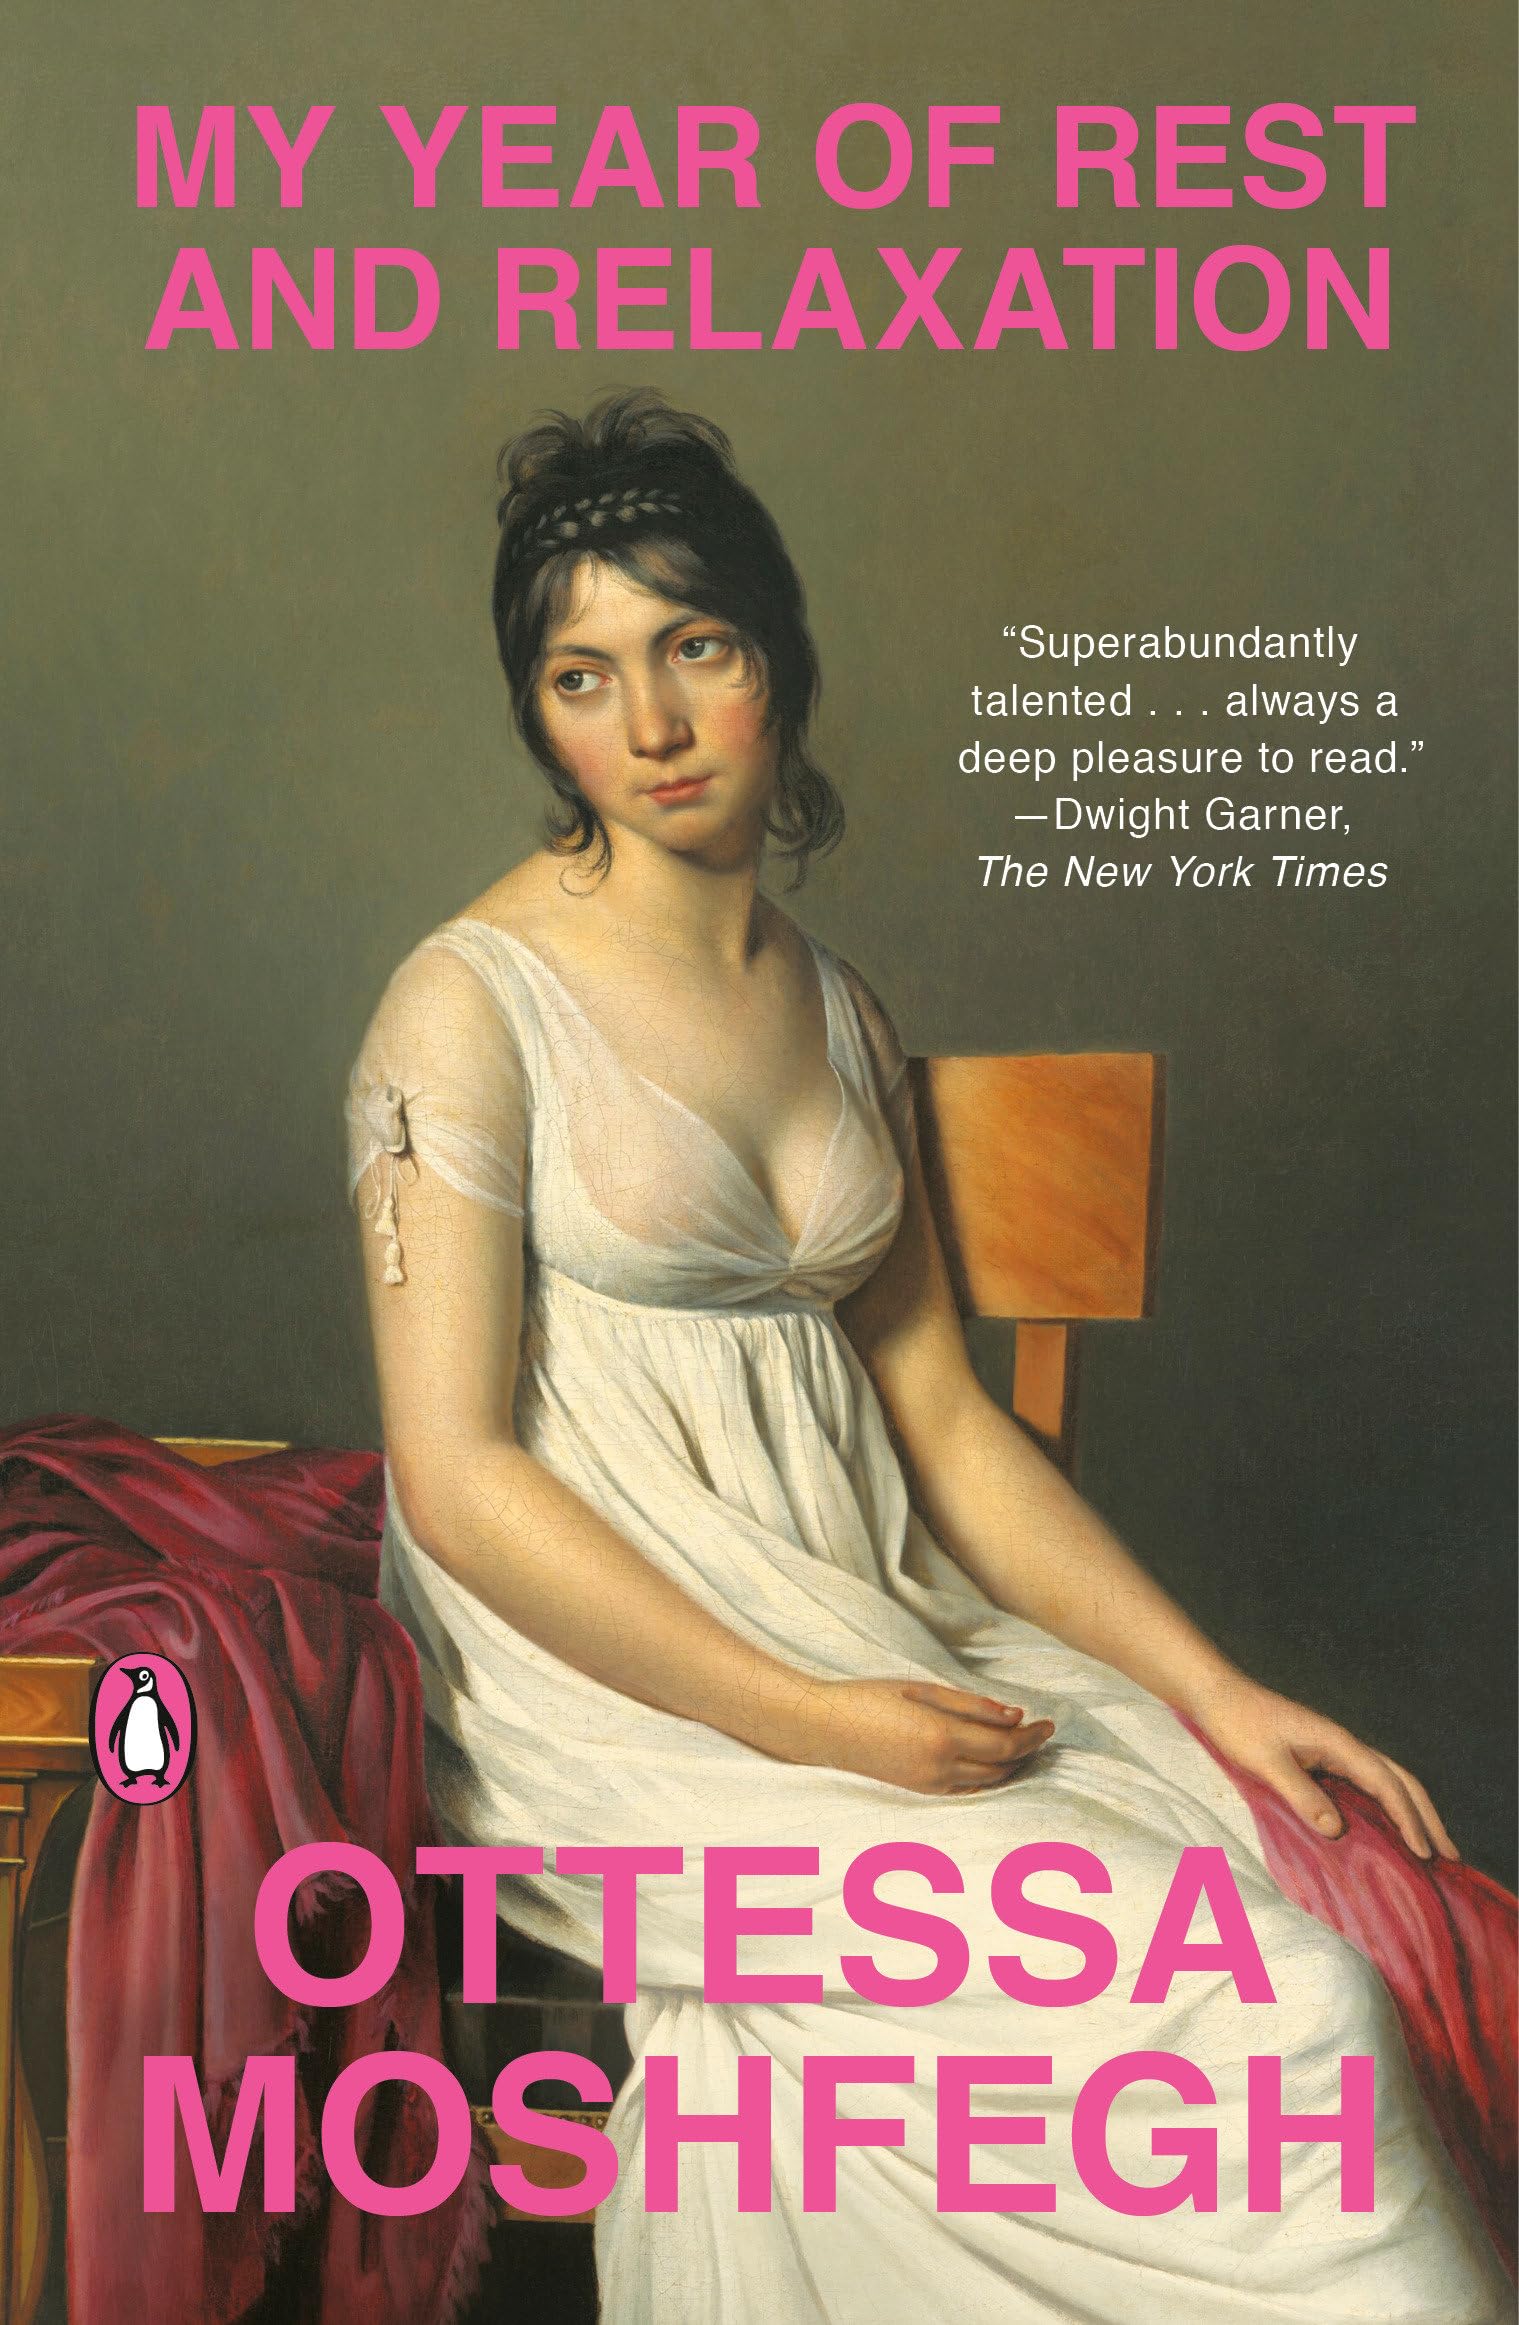 My Year of Rest and Relaxation by Moshfegh, Ottessa